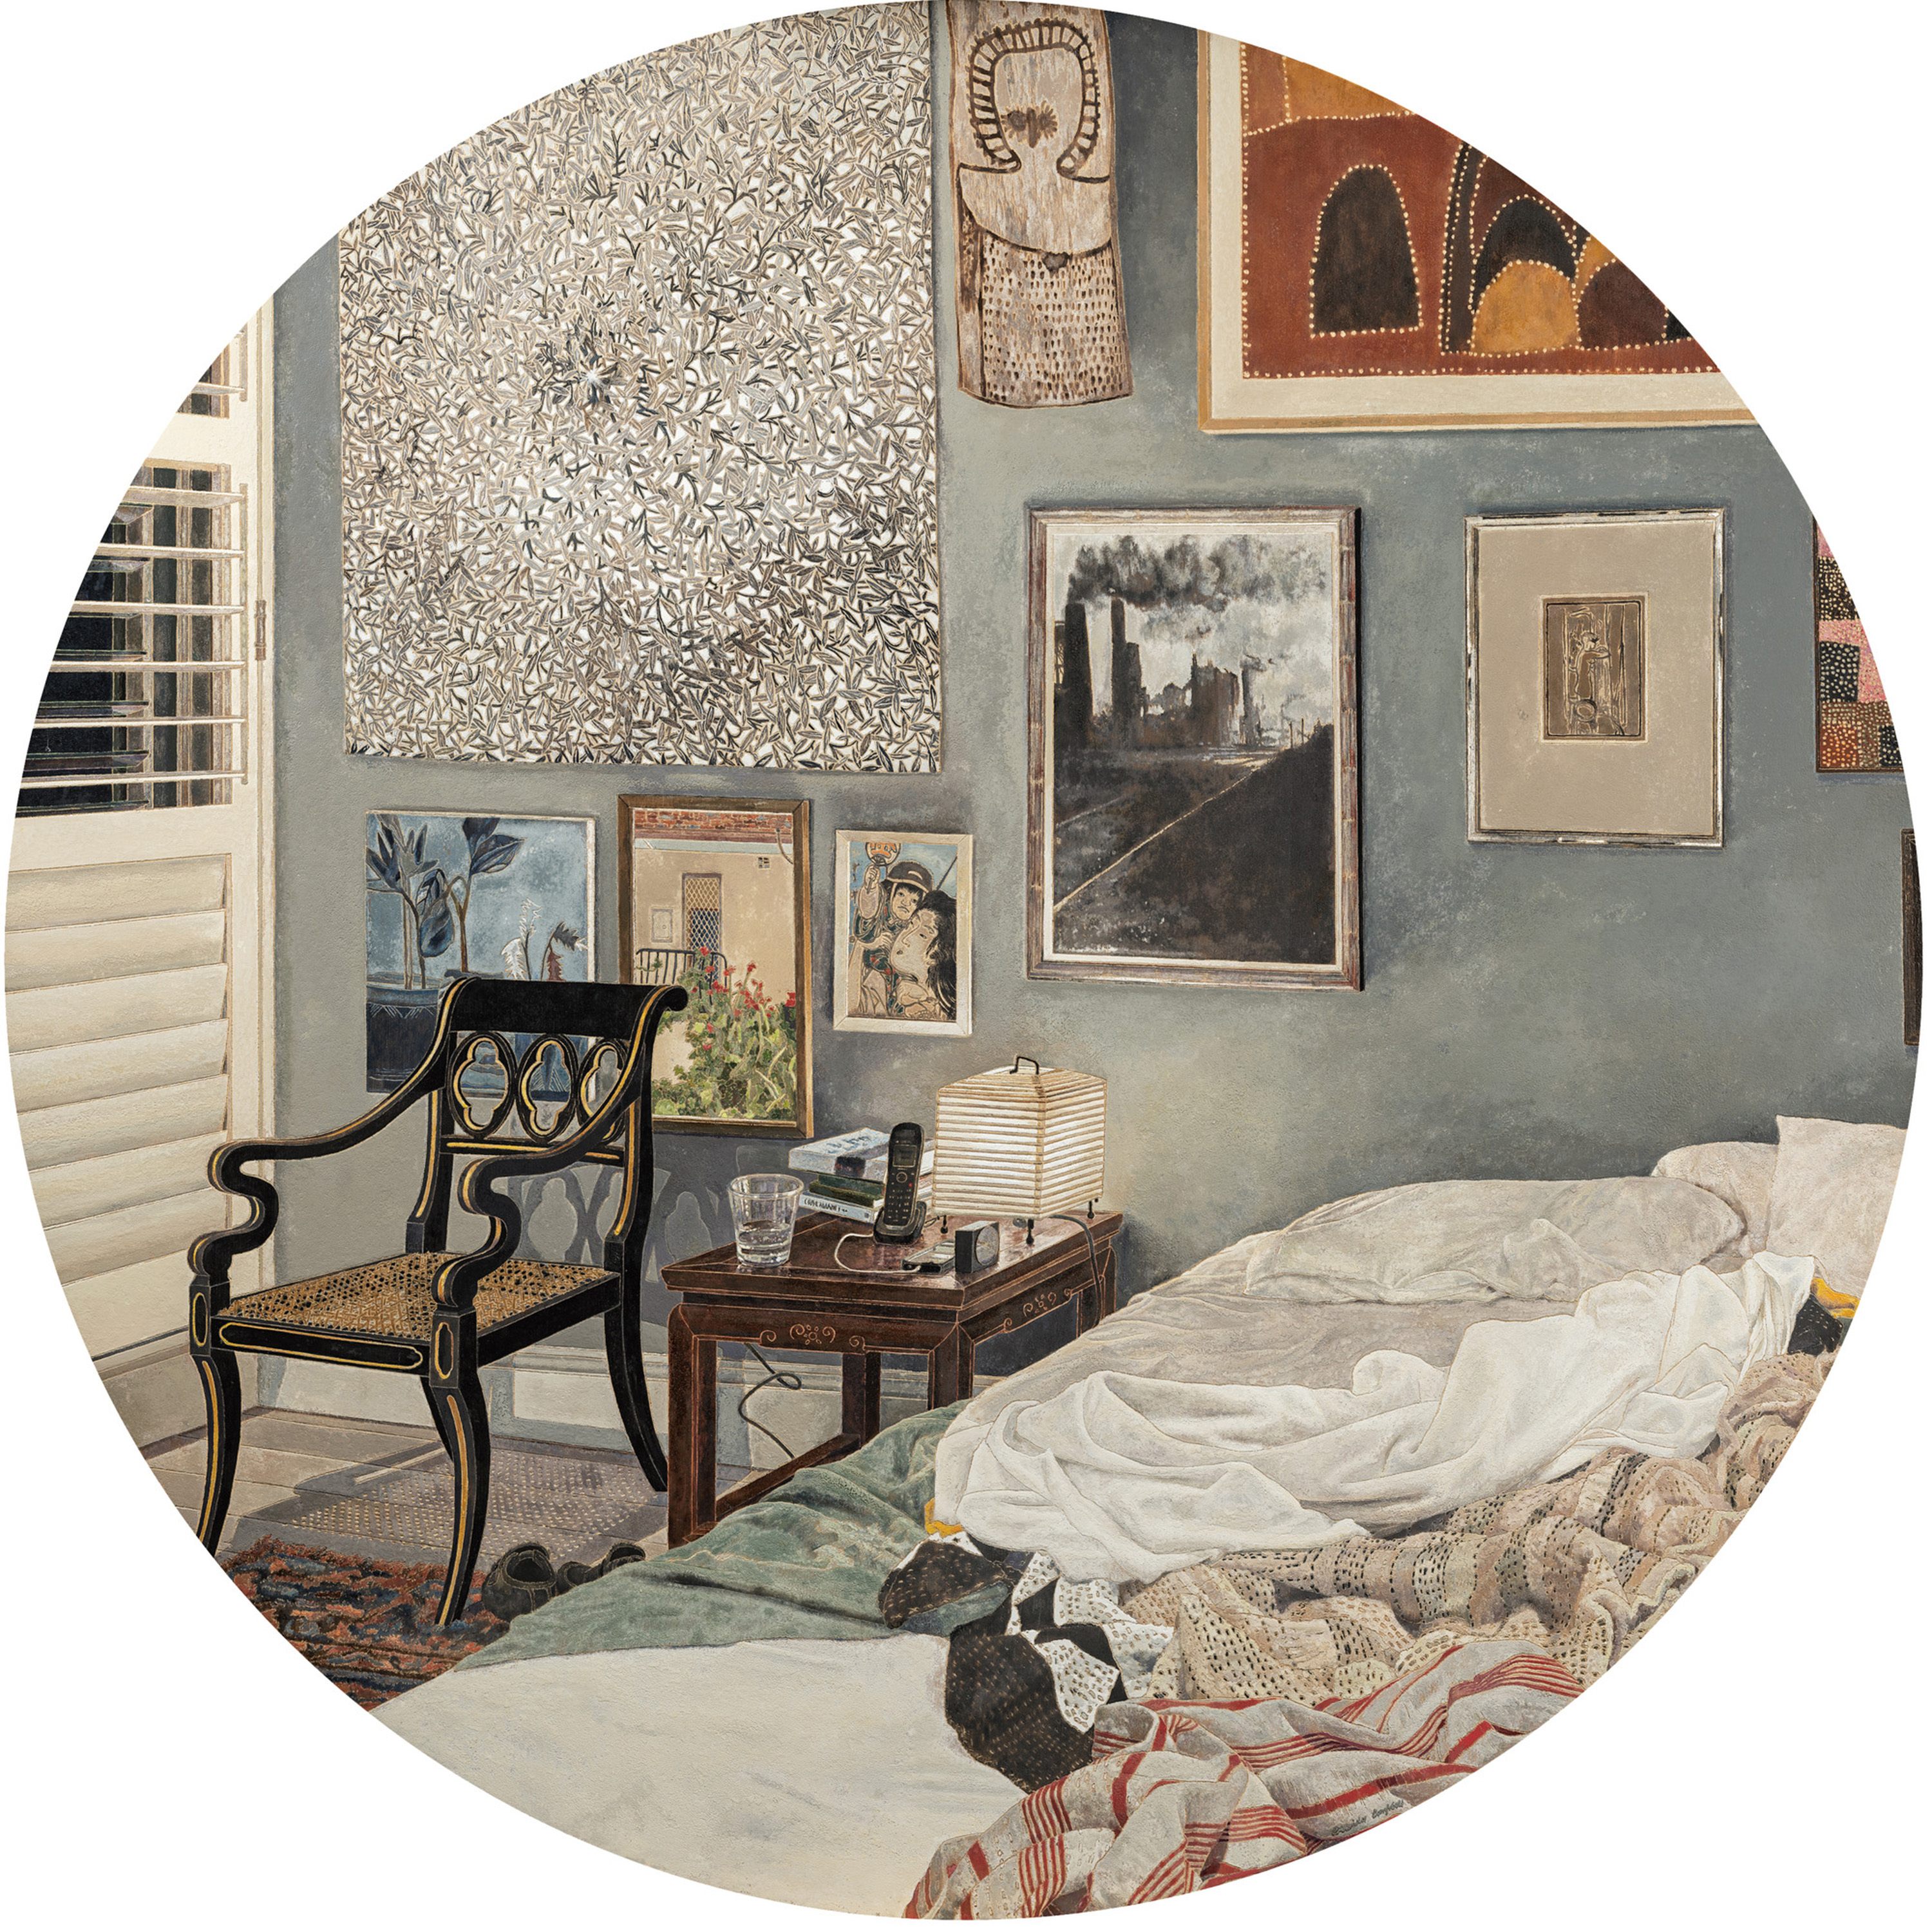 A circular painting of a bedroom, including a sleeper bed, bedside table, chair and art-covered wall